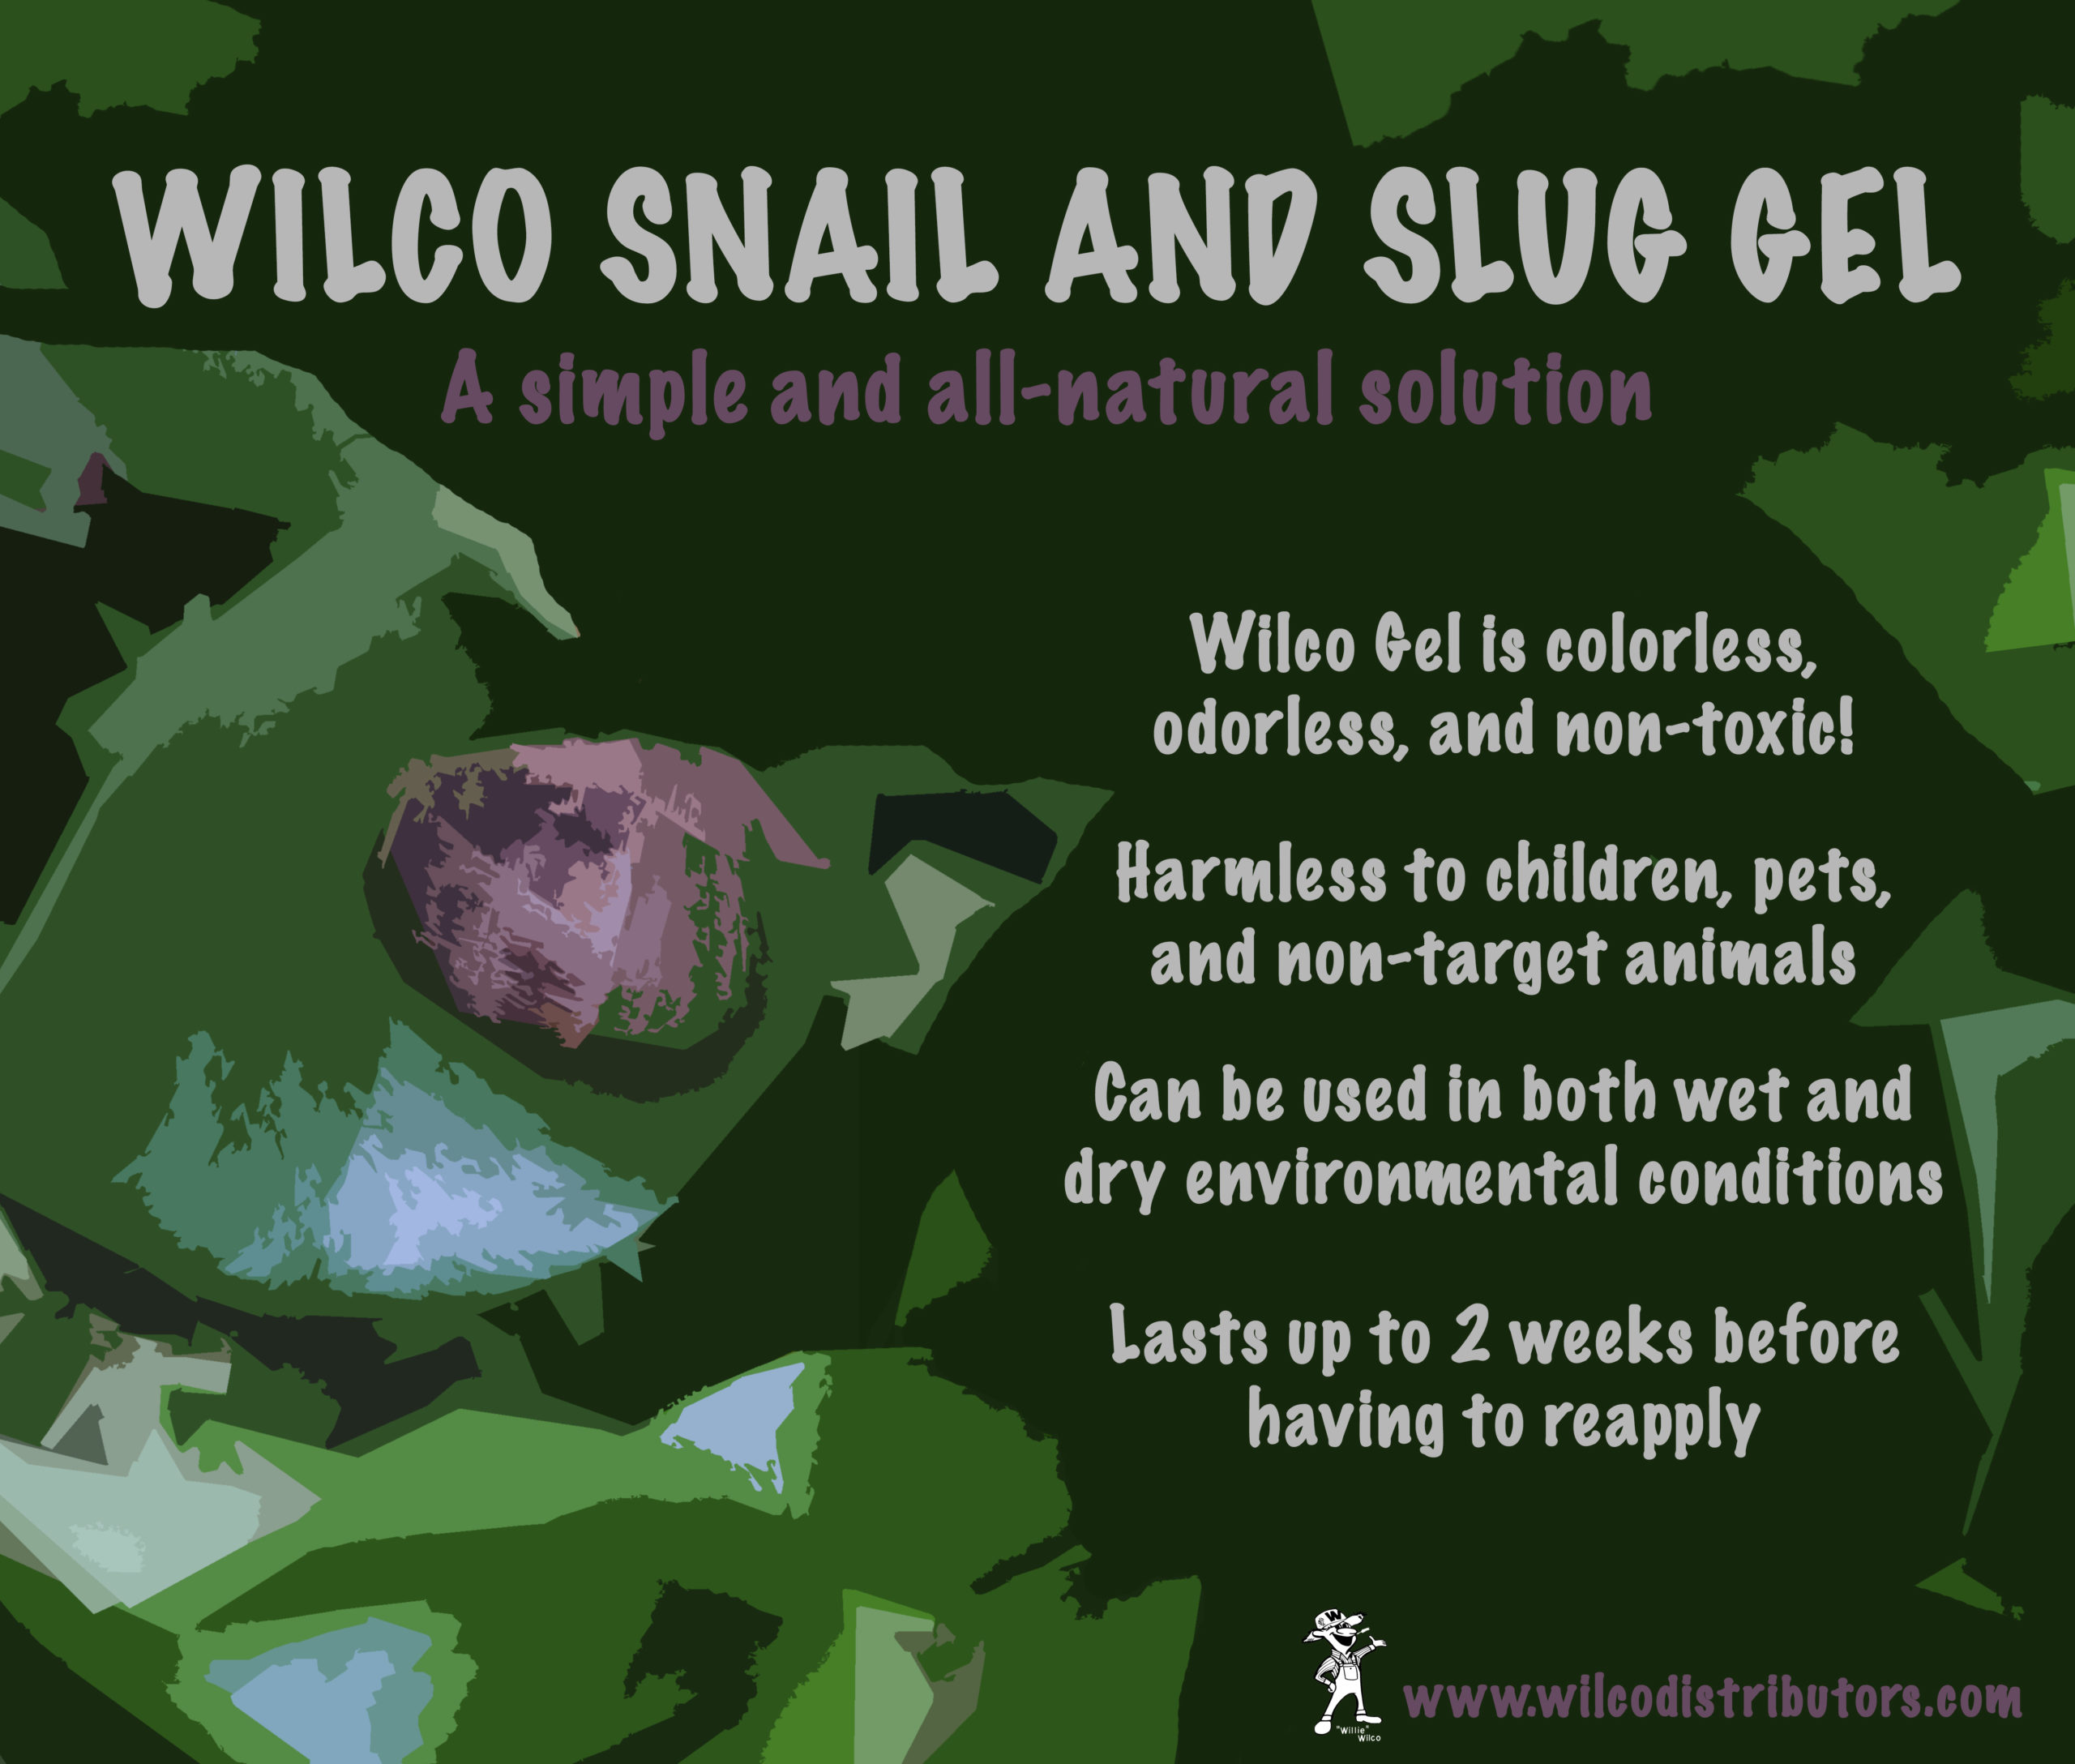 An all-natural solution for snails and slugs!